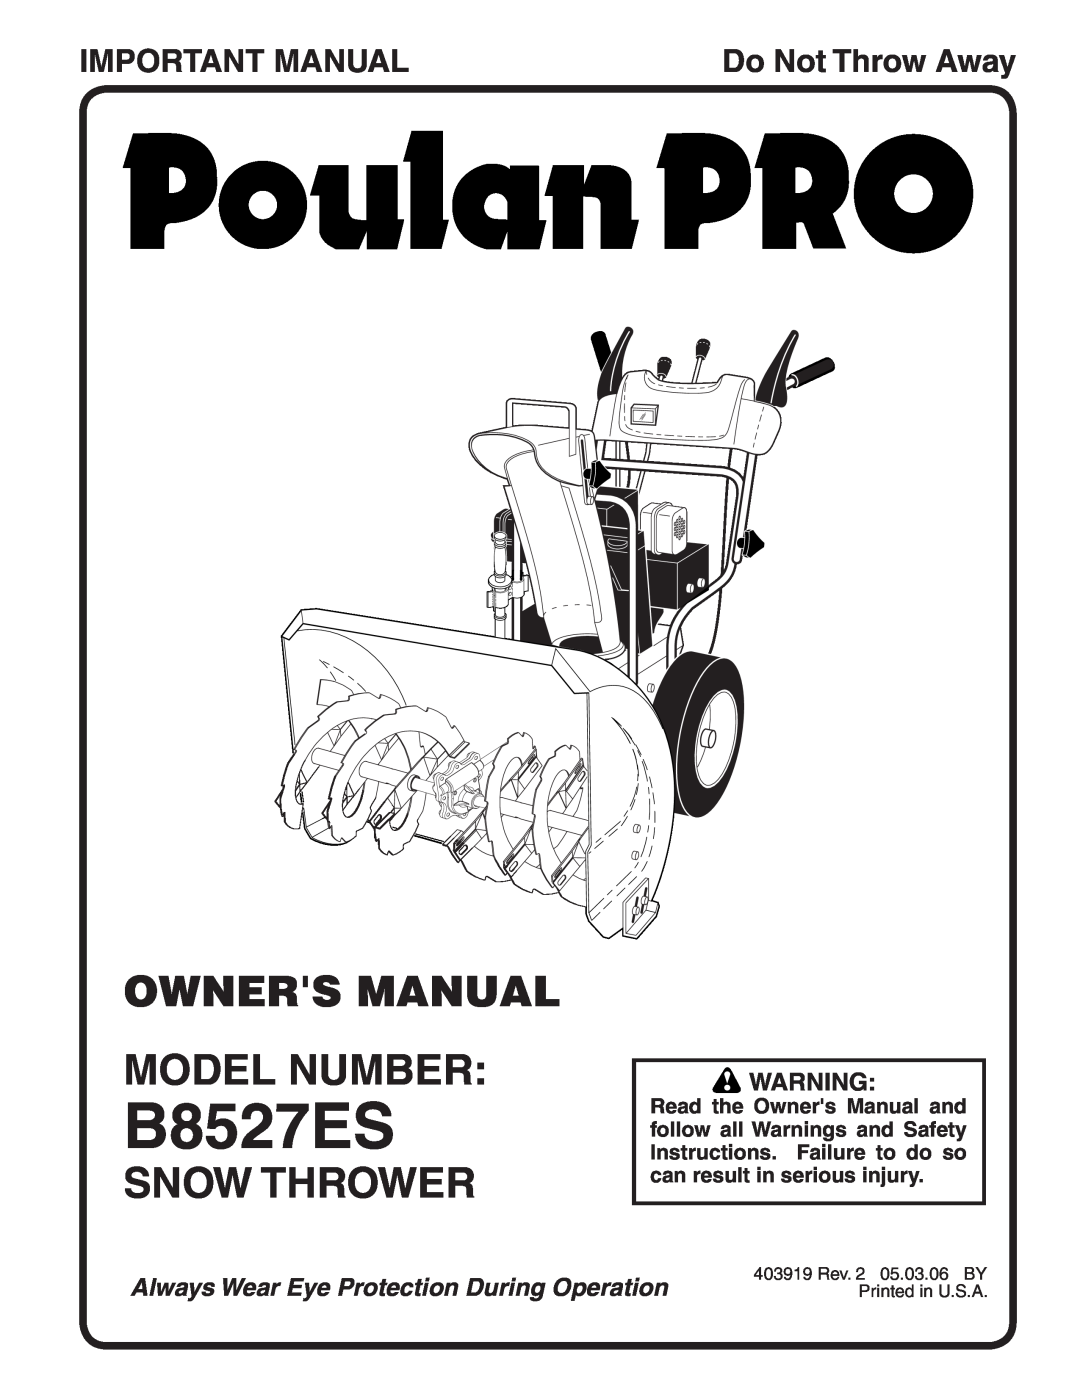 Poulan B8527ES owner manual Snow Thrower, Important Manual, Do Not Throw Away, Always Wear Eye Protection During Operation 